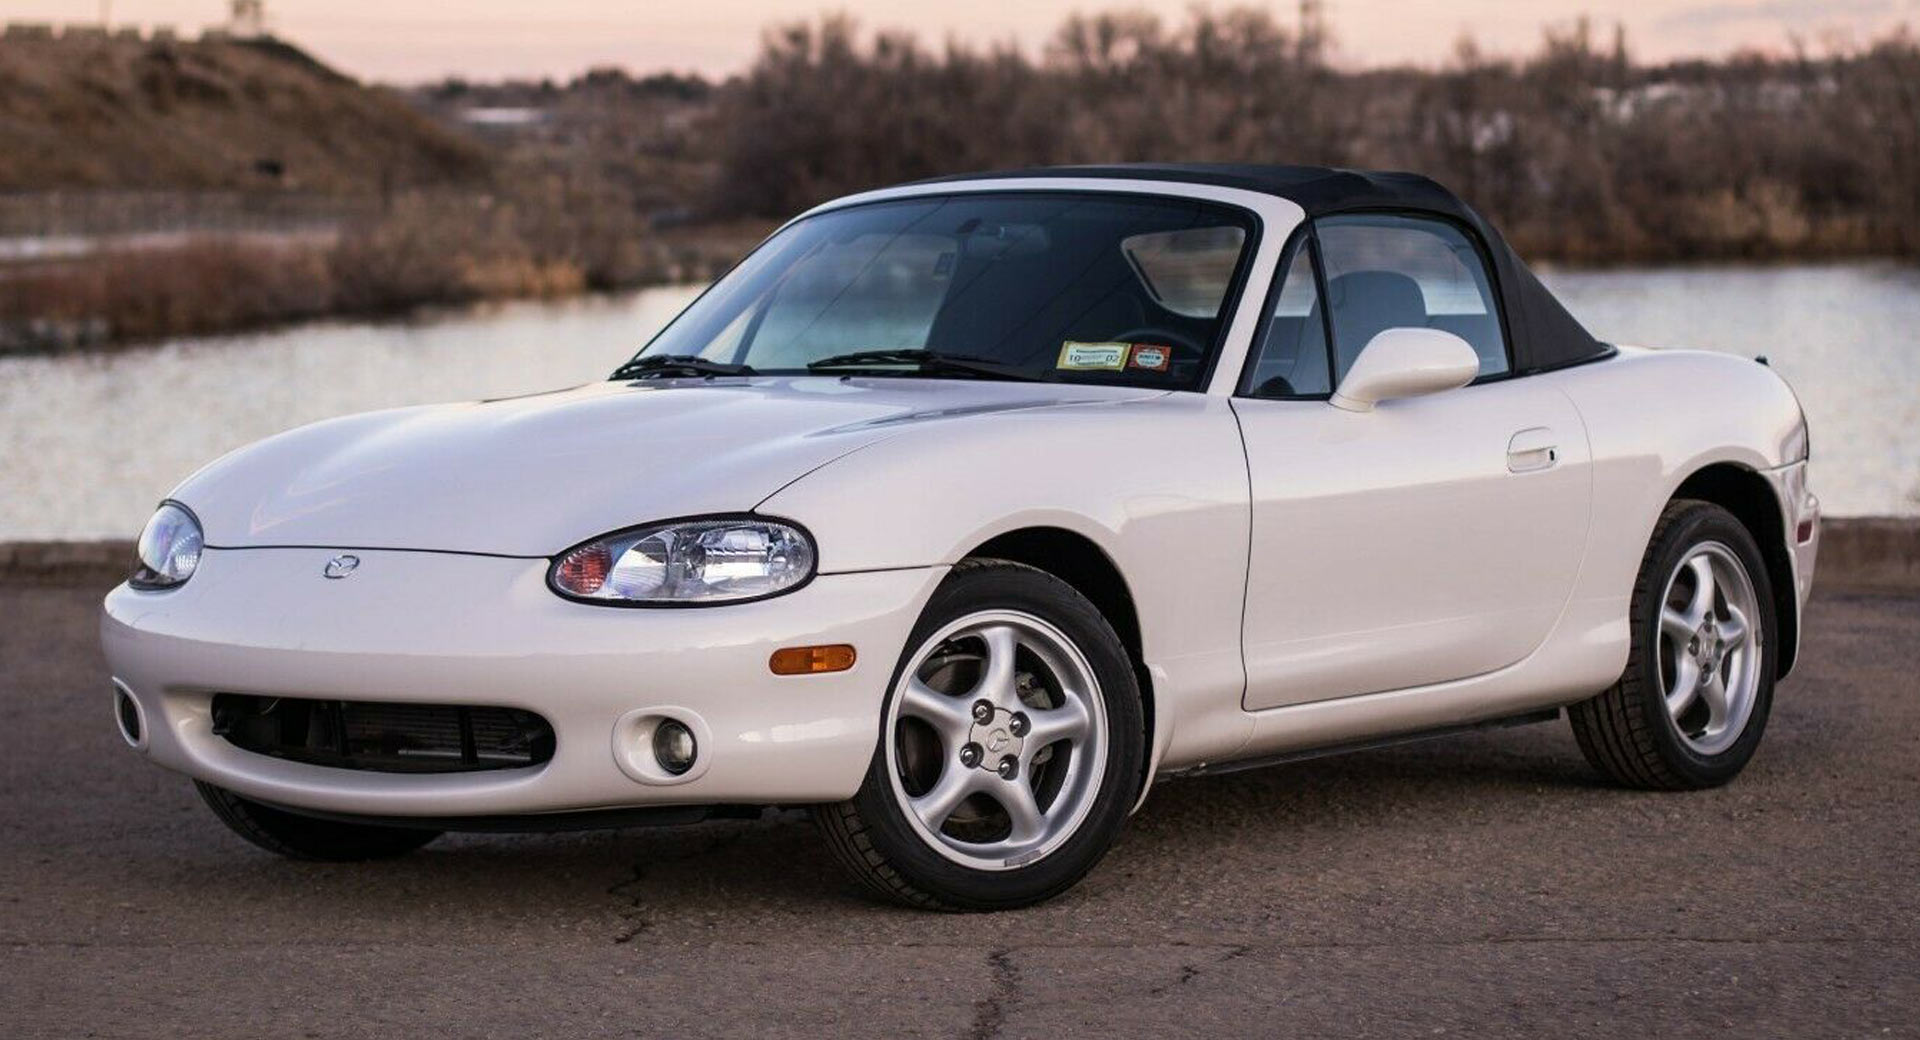 Get Ready For Summer With This 20 Year Old, 1,200 Mile Mazda MX-5 Miata